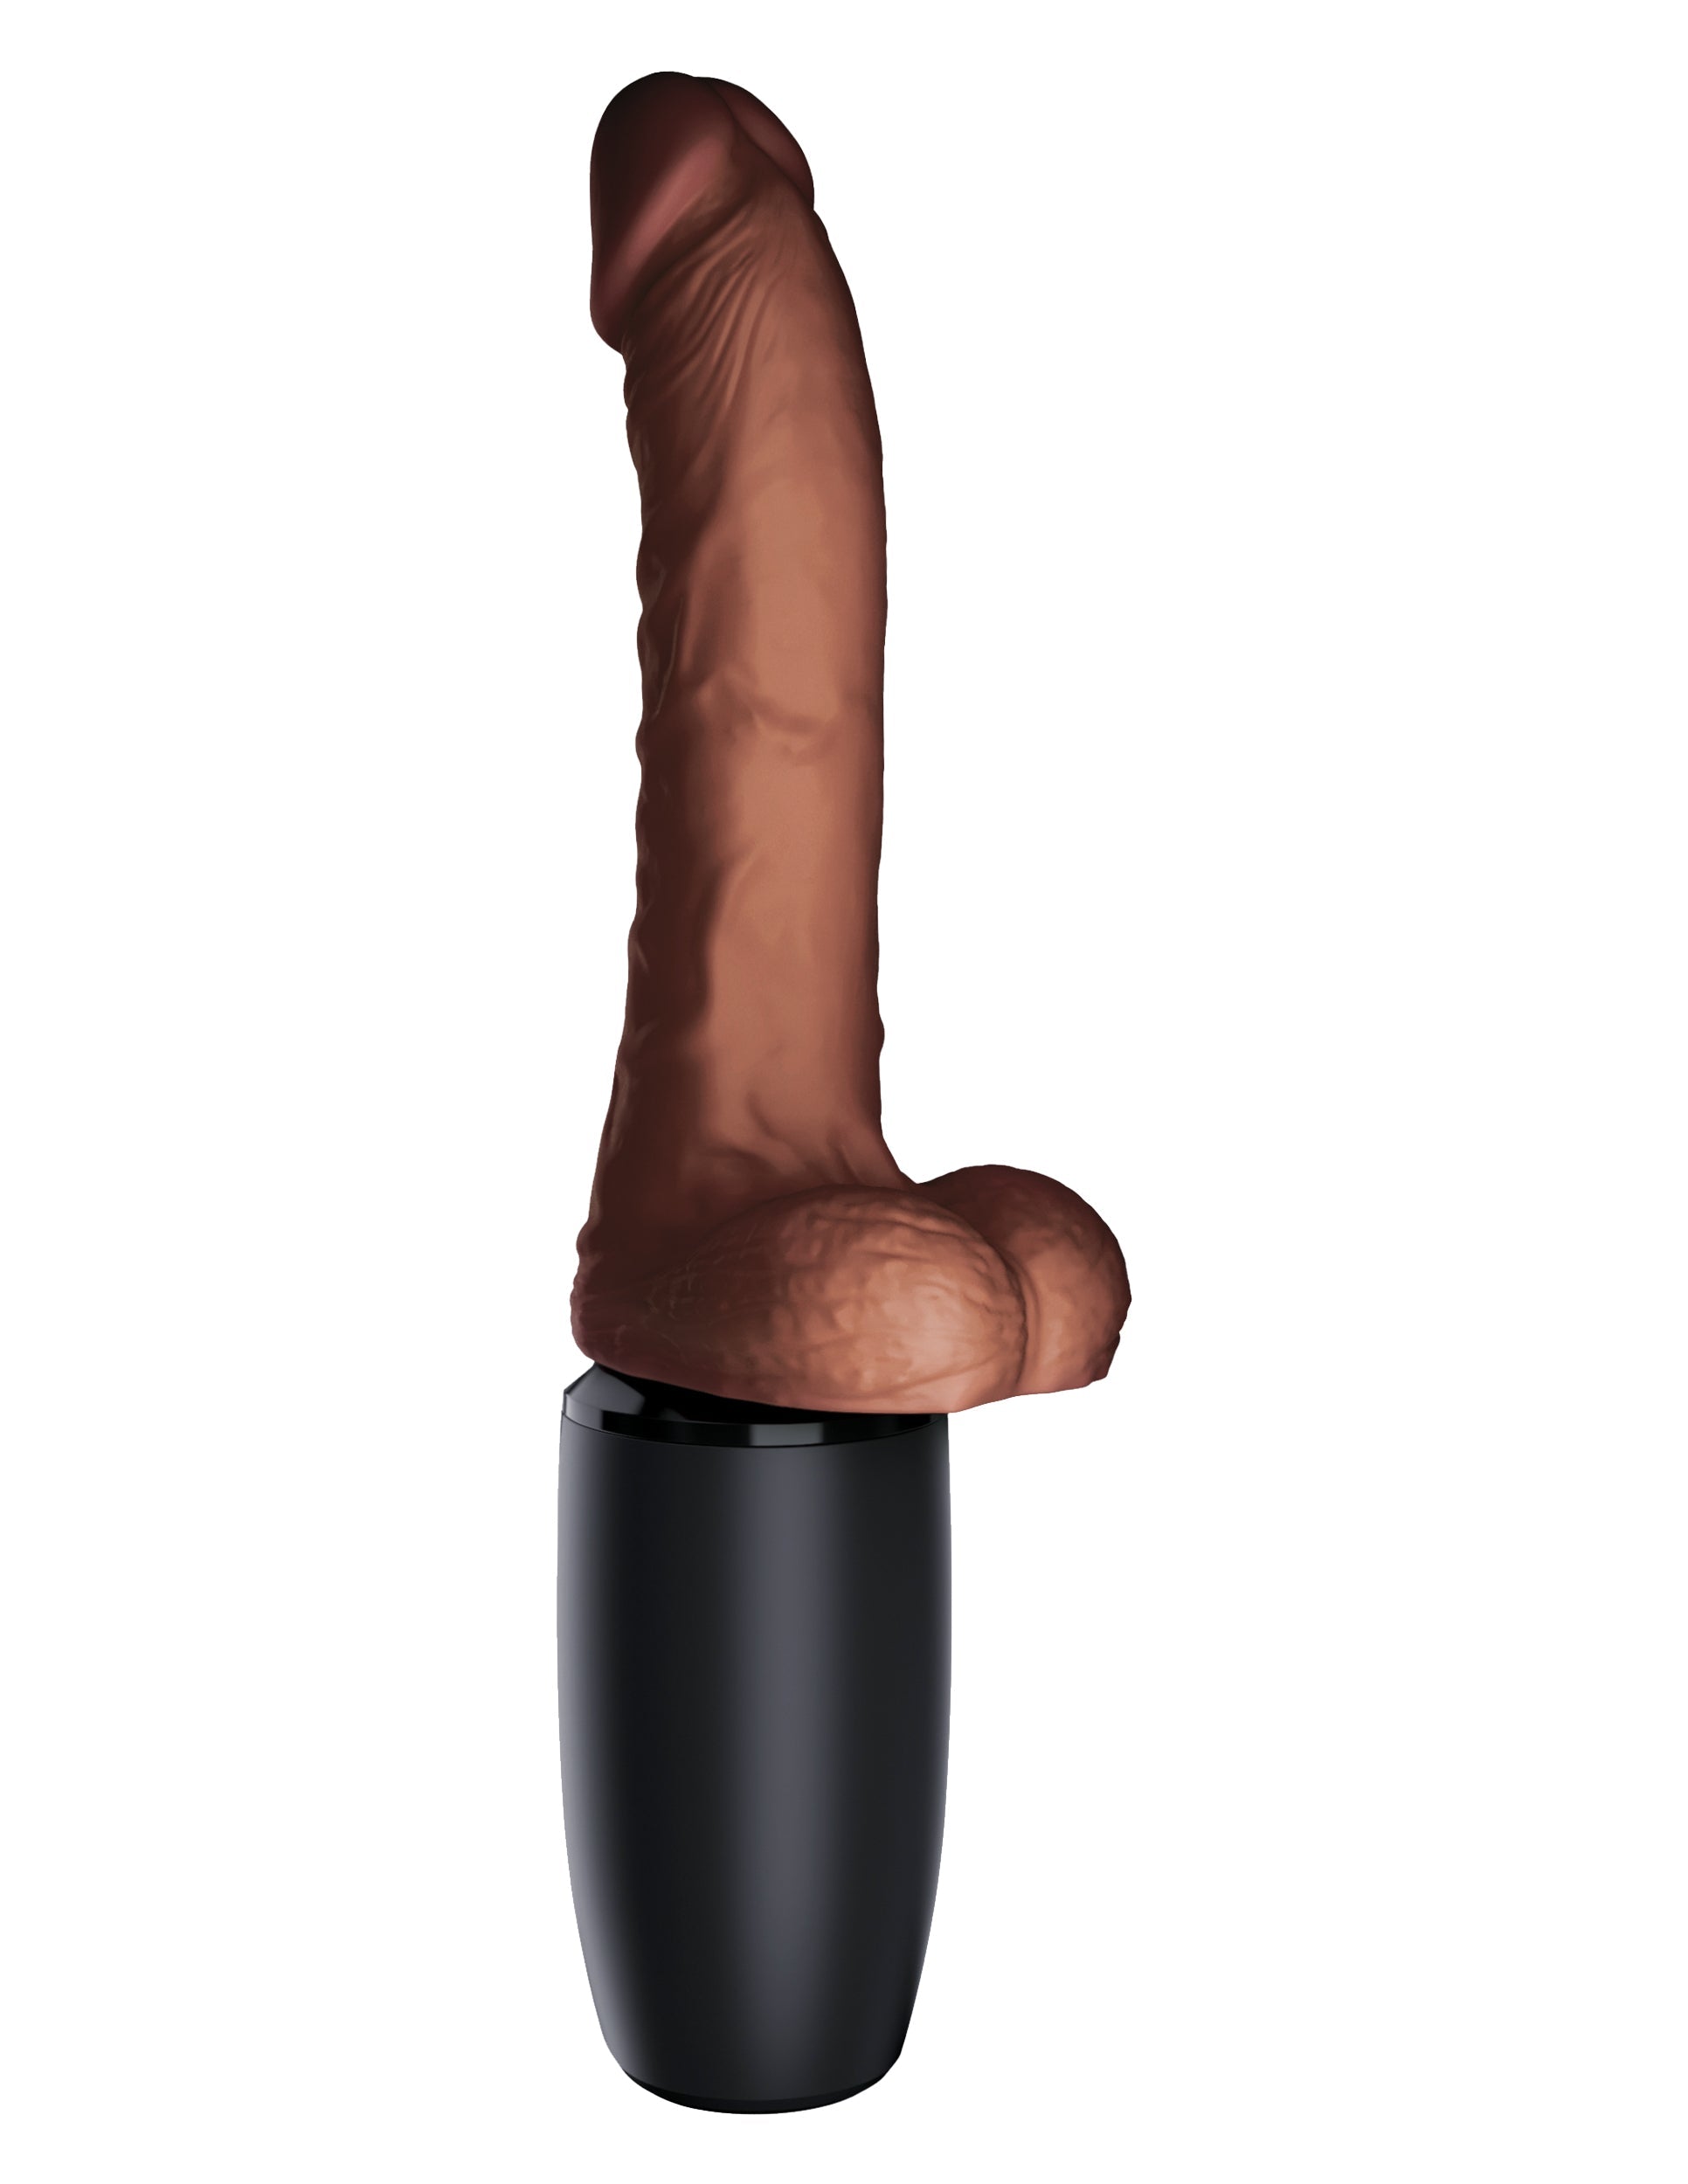 King Cock Plus Rechargeable Thrusting Dildo with Balls 7.5 Inches